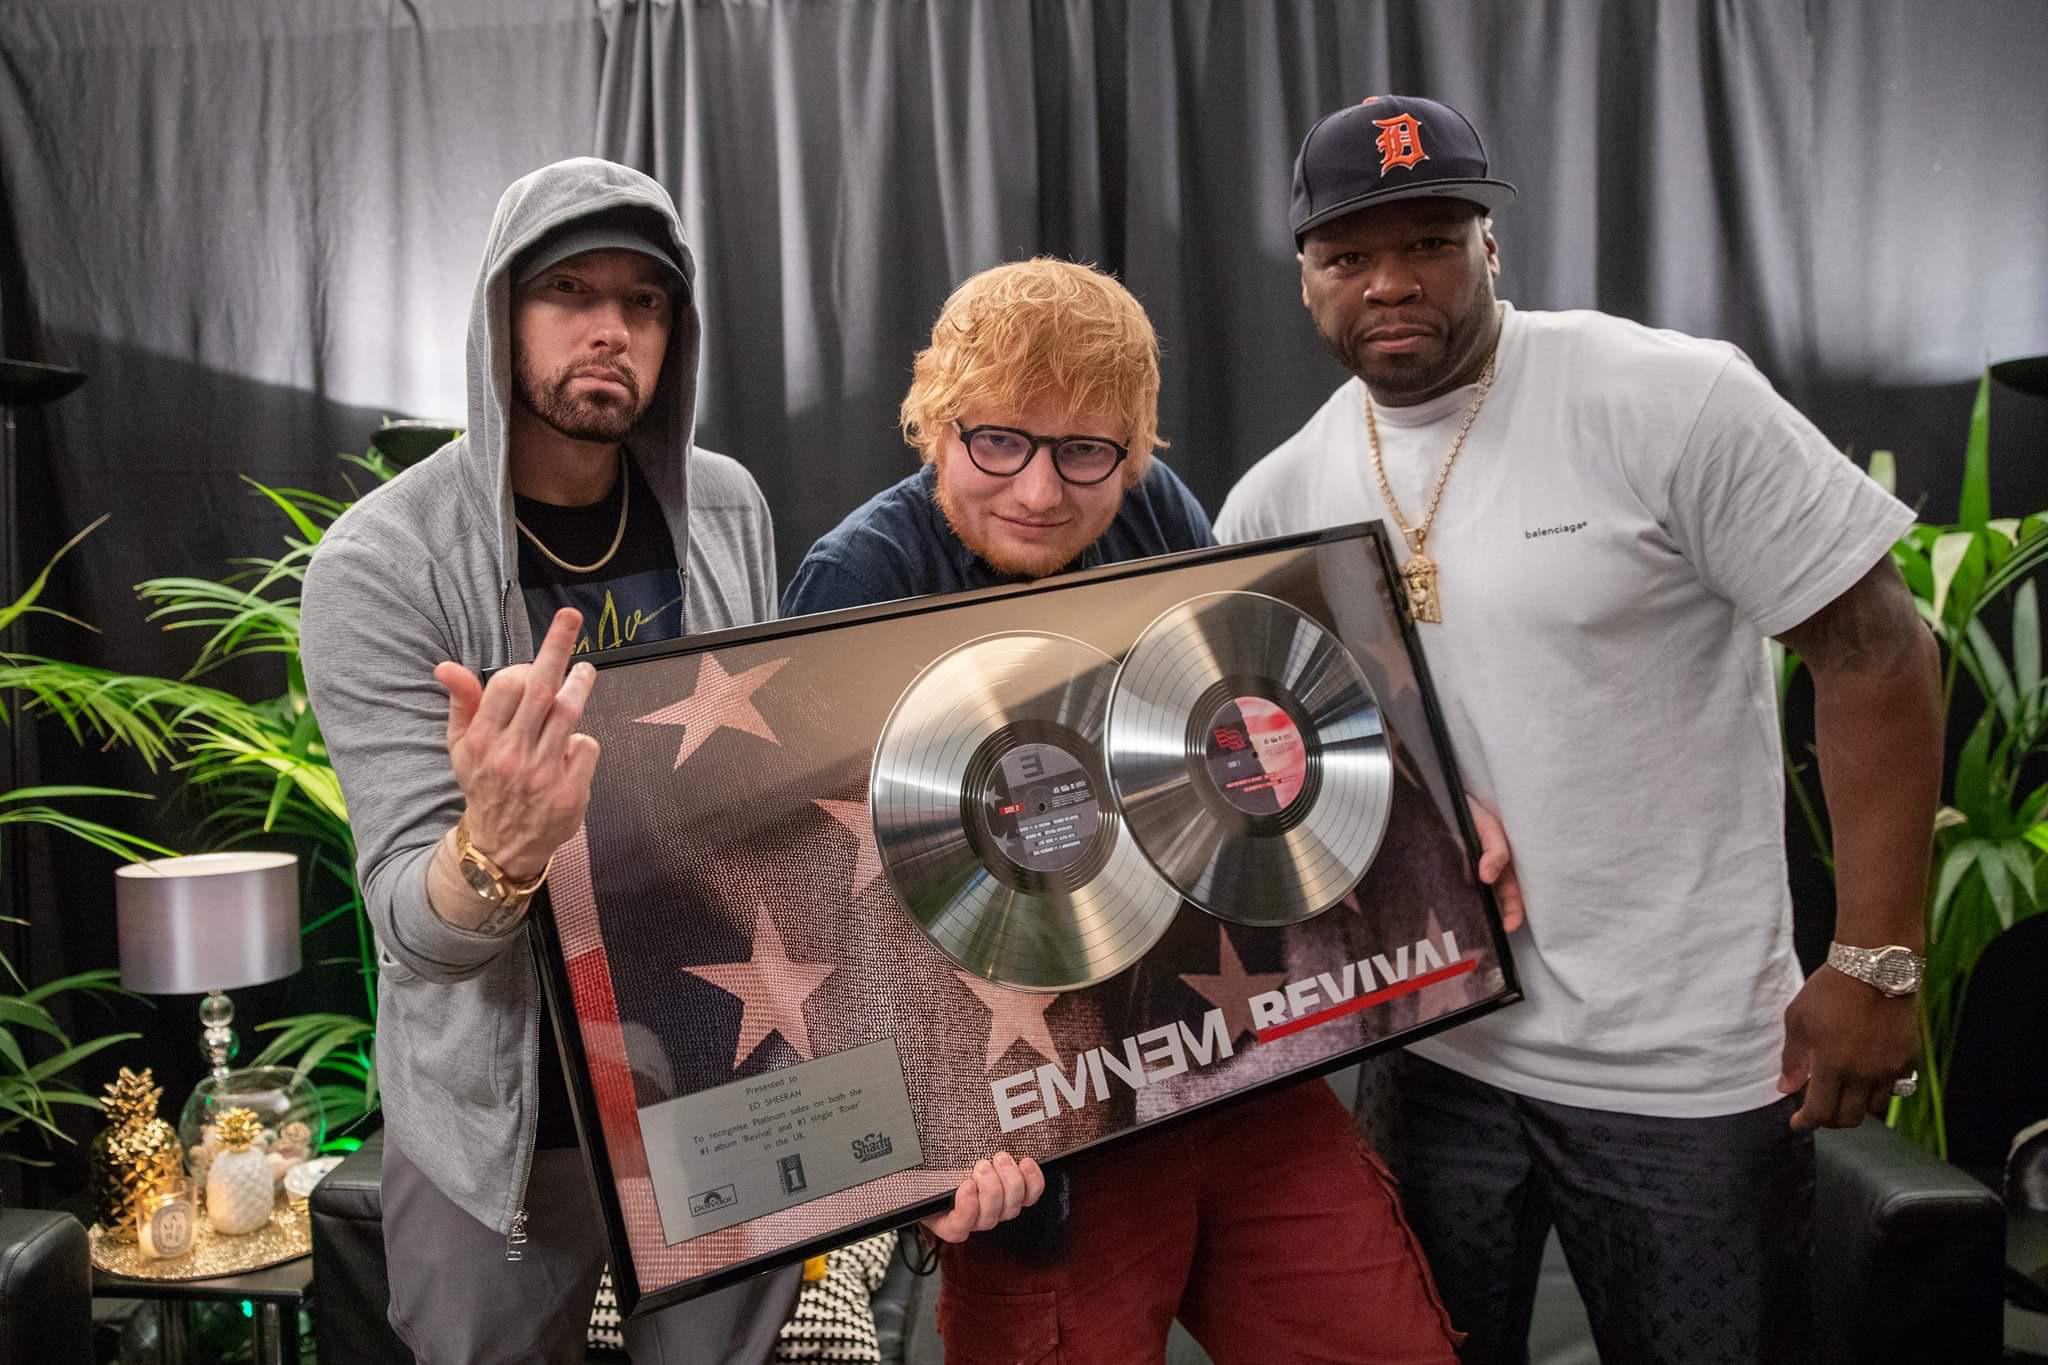 ed sheeran eminem 50 cent - Shil! balenciaga ada Presented to Ed Sheeran To recognise Platinum sales on both the 1 Revand single her in the Uk Emnem Revival